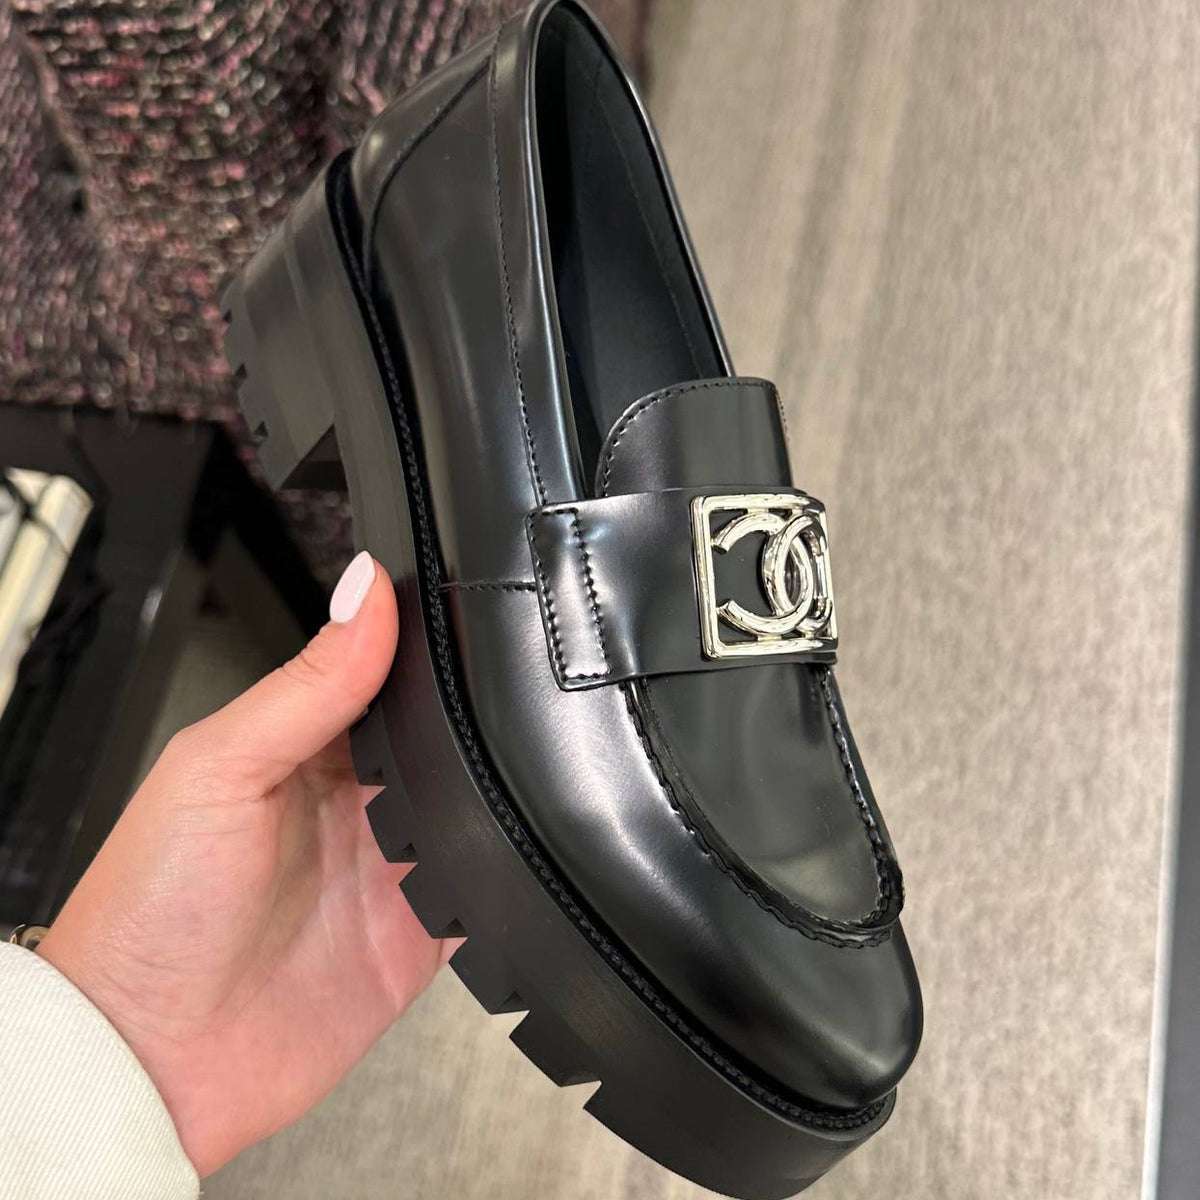 Chanel Loafers 2020/2021 in size 41